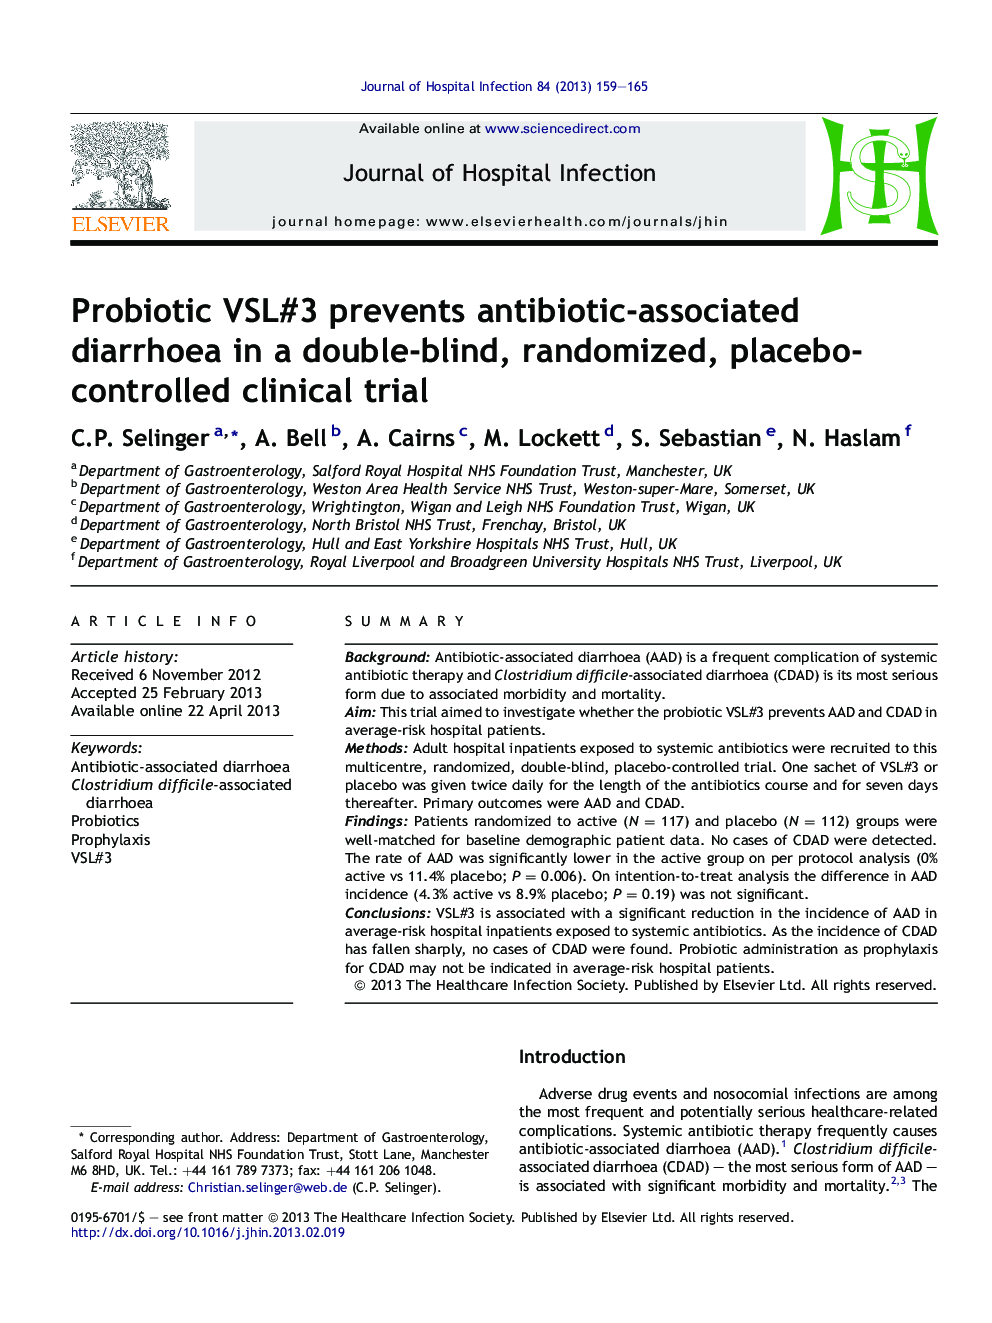 Probiotic VSL#3 prevents antibiotic-associated diarrhoea in a double-blind, randomized, placebo-controlled clinical trial